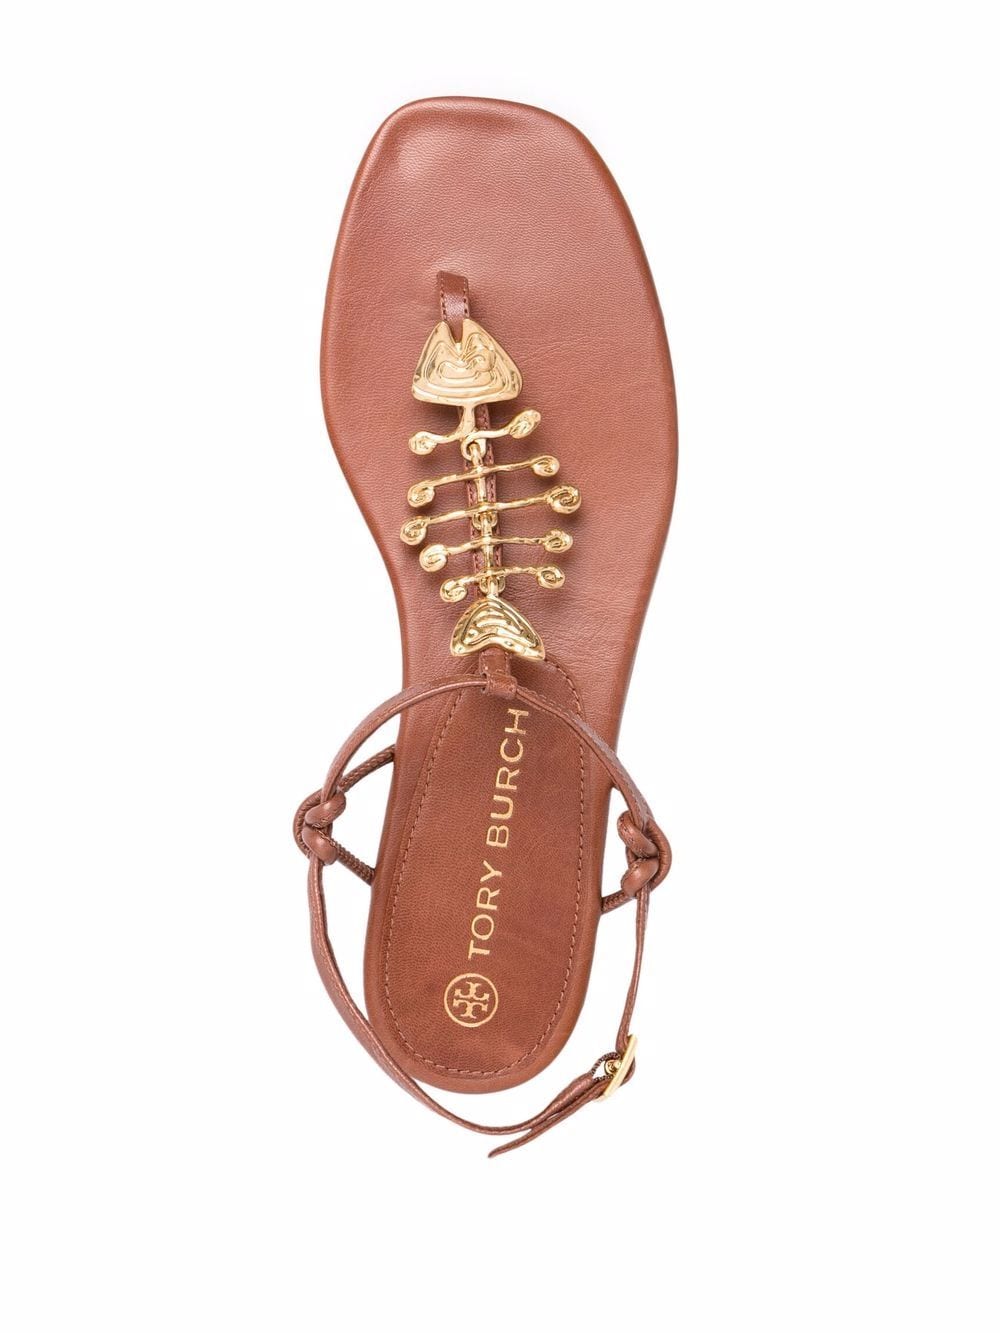 Shop Tory Burch Capri Fish sandals with Express Delivery - FARFETCH